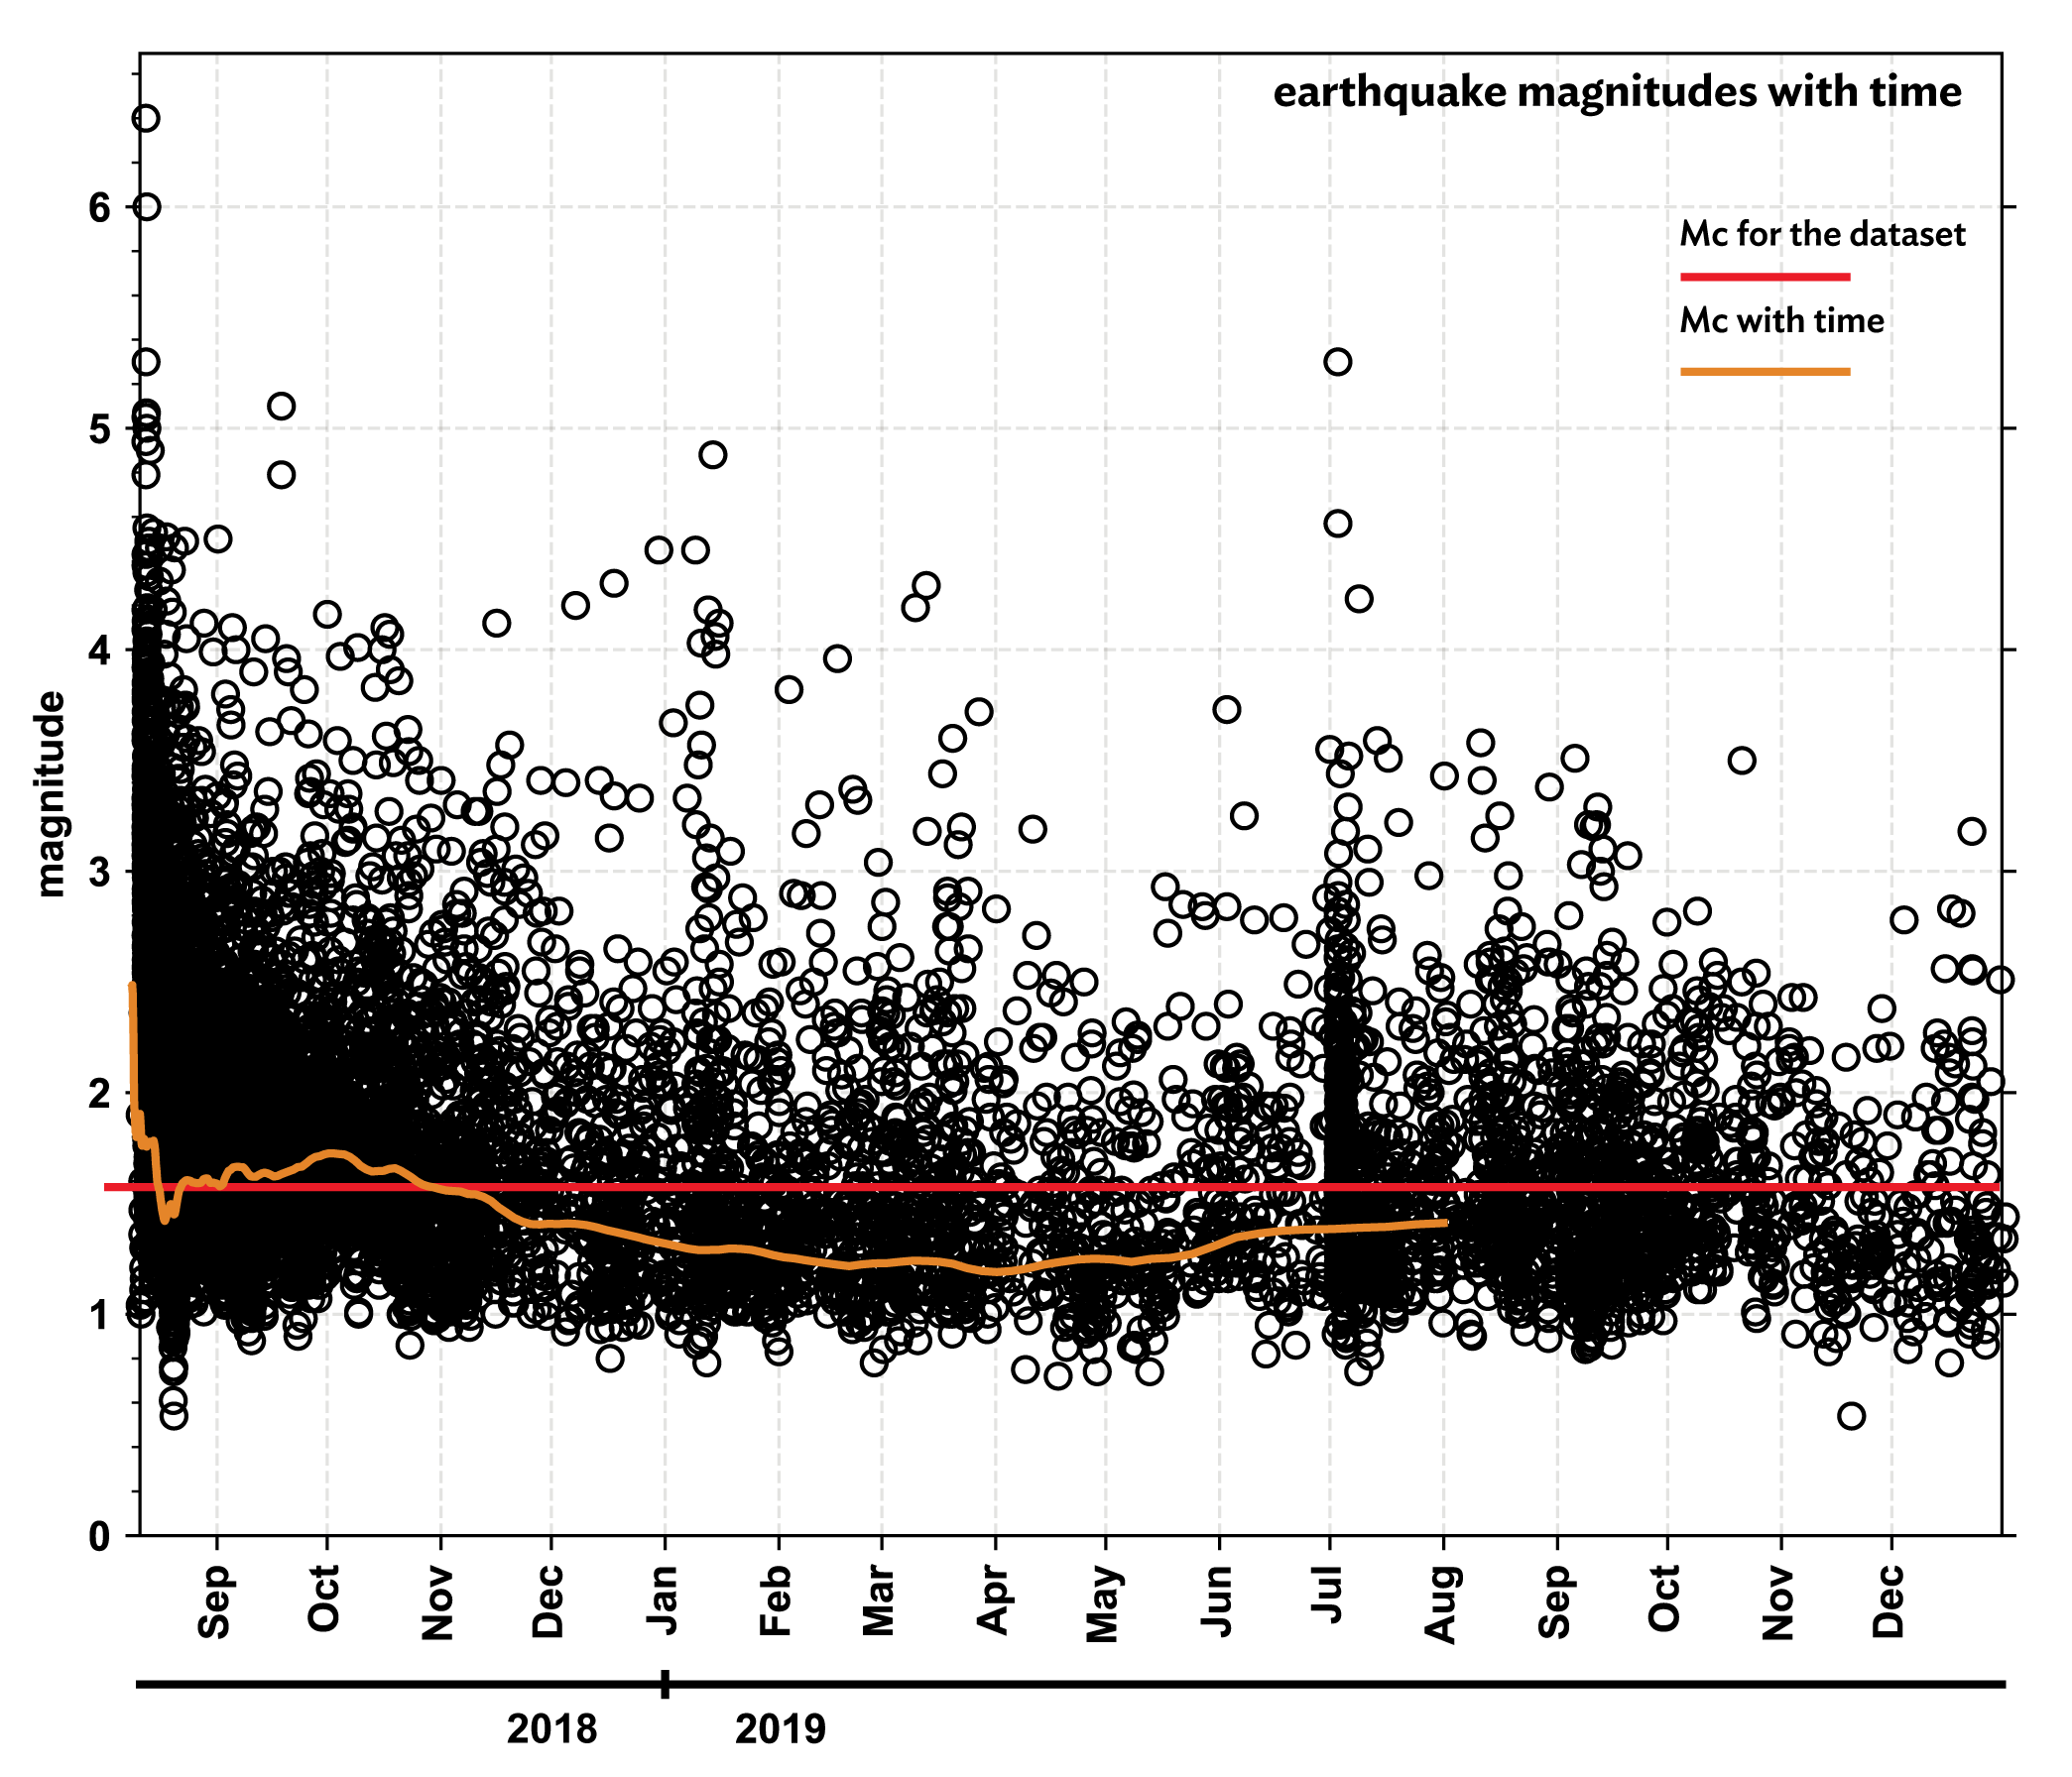 This figure shows earthquake magnitudes over time with the Mc for the dataset as a whole